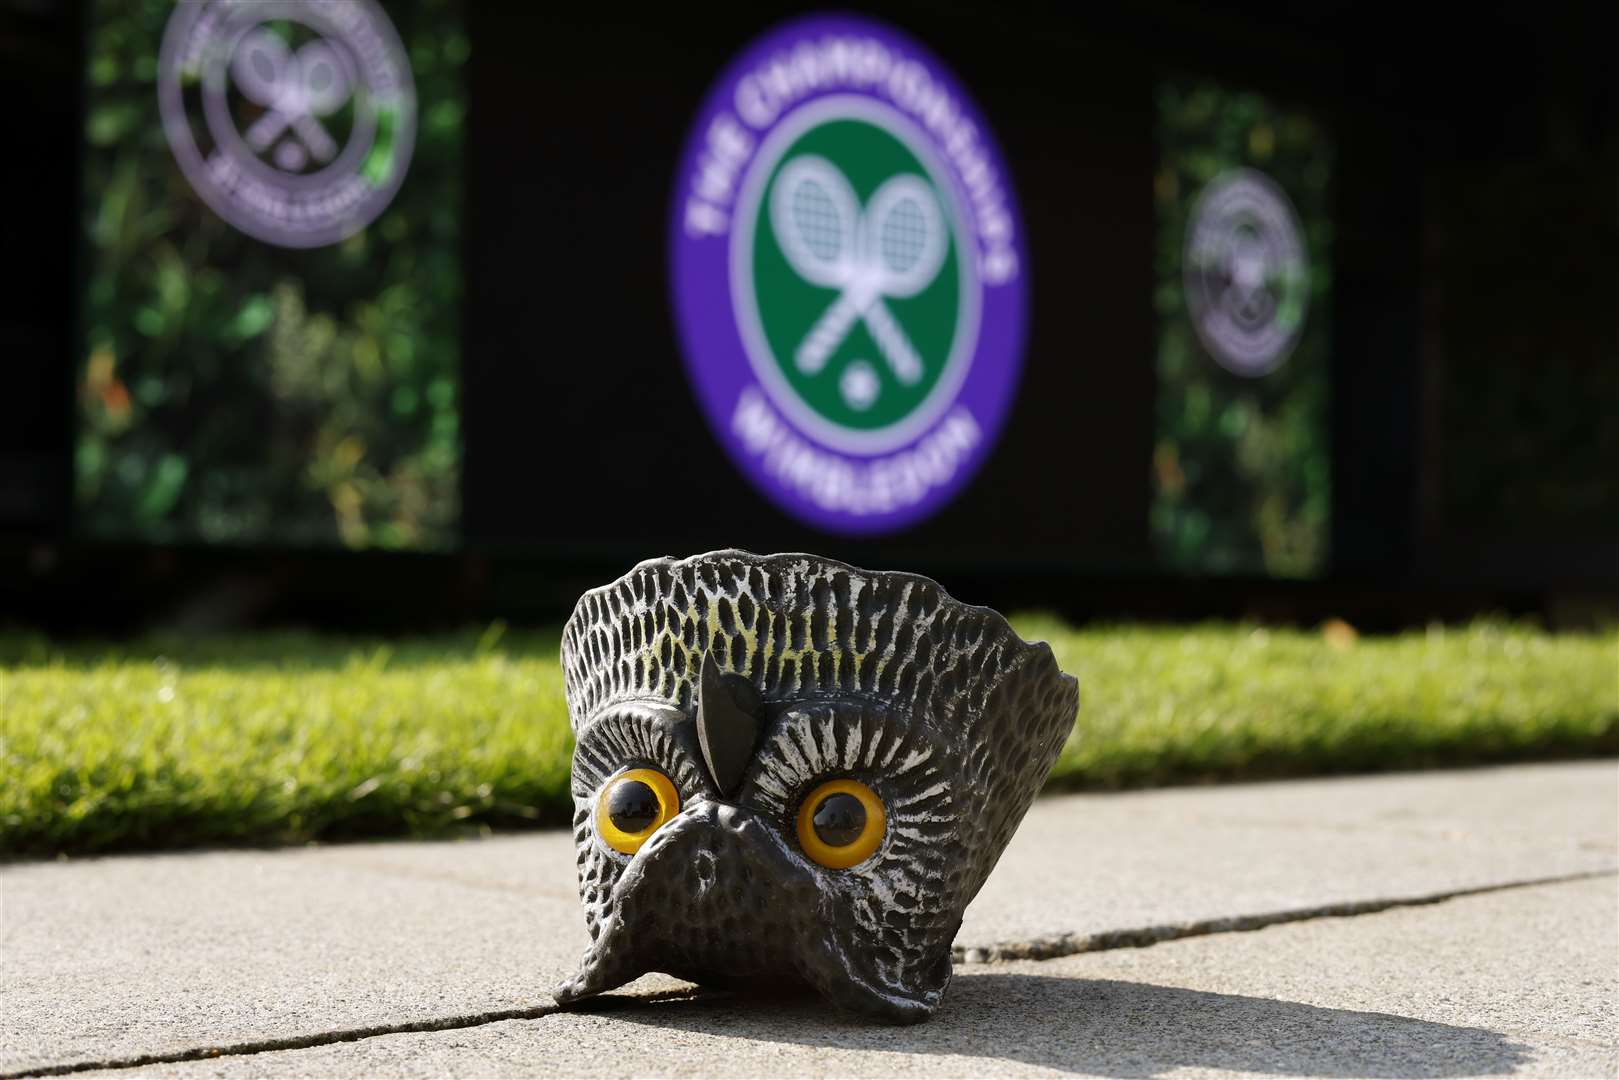 A deterrent owl device on the turf (Steven Paston/PA)